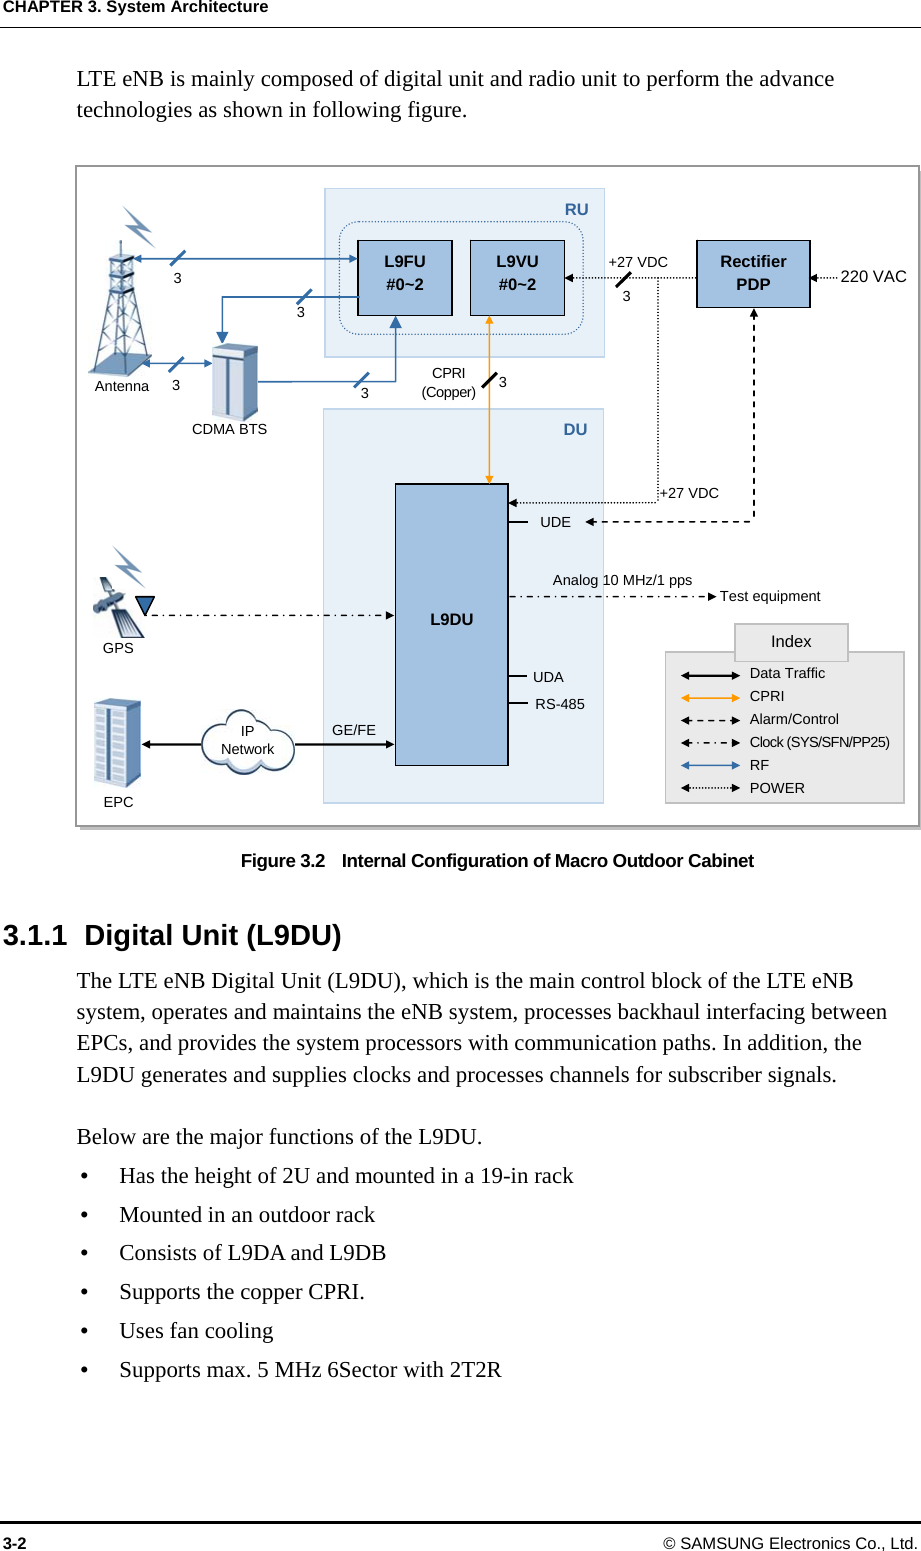 CHAPTER 3. System Architecture 3-2  © SAMSUNG Electronics Co., Ltd. LTE eNB is mainly composed of digital unit and radio unit to perform the advance technologies as shown in following figure.  Figure 3.2    Internal Configuration of Macro Outdoor Cabinet  3.1.1  Digital Unit (L9DU) The LTE eNB Digital Unit (L9DU), which is the main control block of the LTE eNB system, operates and maintains the eNB system, processes backhaul interfacing between EPCs, and provides the system processors with communication paths. In addition, the L9DU generates and supplies clocks and processes channels for subscriber signals.  Below are the major functions of the L9DU.  Has the height of 2U and mounted in a 19-in rack  Mounted in an outdoor rack  Consists of L9DA and L9DB  Supports the copper CPRI.  Uses fan cooling  Supports max. 5 MHz 6Sector with 2T2R  RU L9FU #0~2 L9VU #0~2 DUL9DU 3 3 3  3 CPRI (Copper) 3 +27 VDC +27 VDC 220 VAC Rectifier PDP 3 UDE UDA RS-485GE/FE Analog 10 MHz/1 pps  Test equipment GPS EPC Antenna Data Traffic CPRI Alarm/Control Clock (SYS/SFN/PP25)RF POWER Index IP Network CDMA BTS 